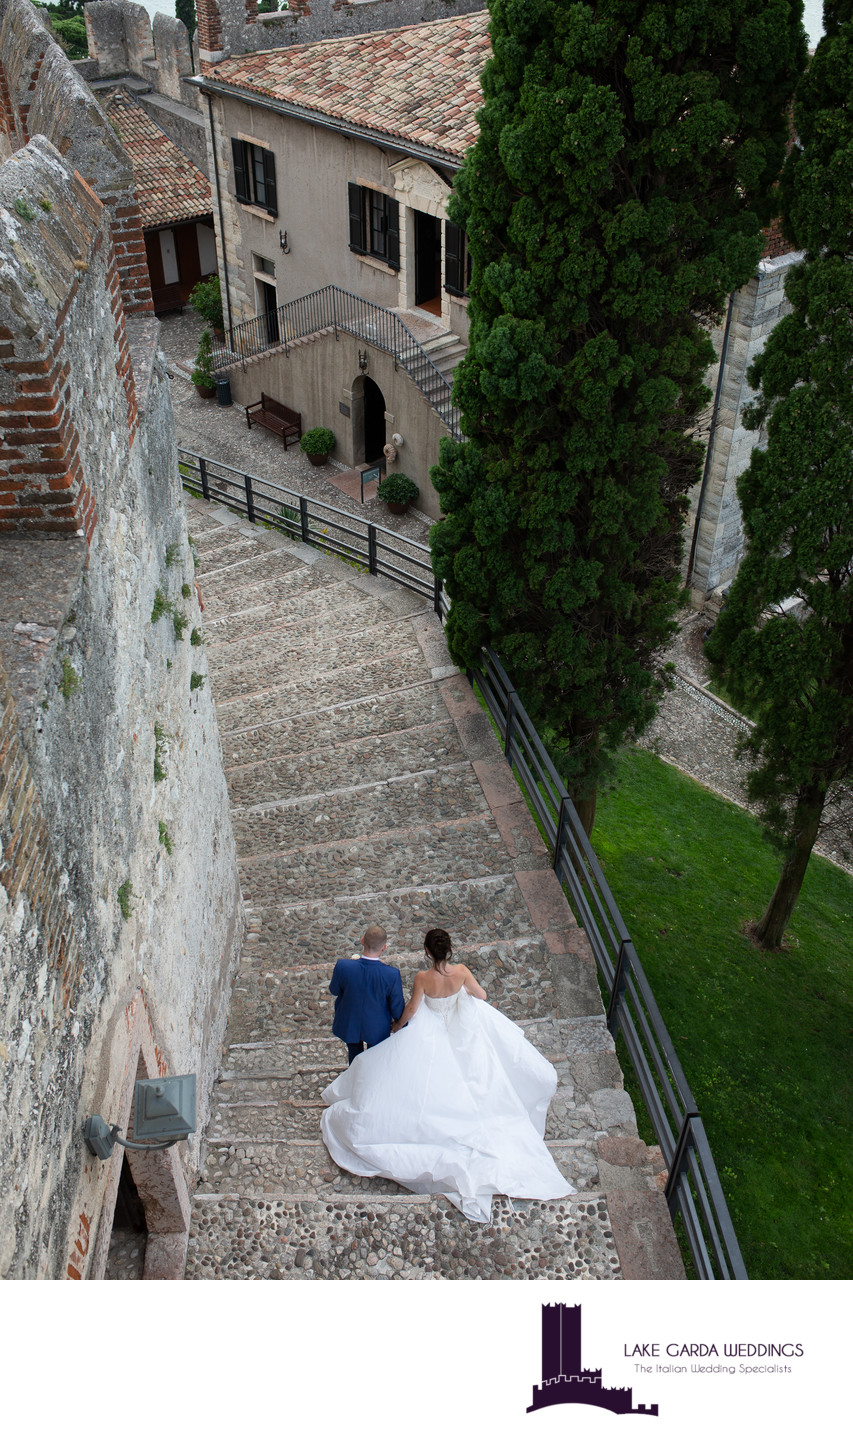 Divine and romantic castle weddings in Italy